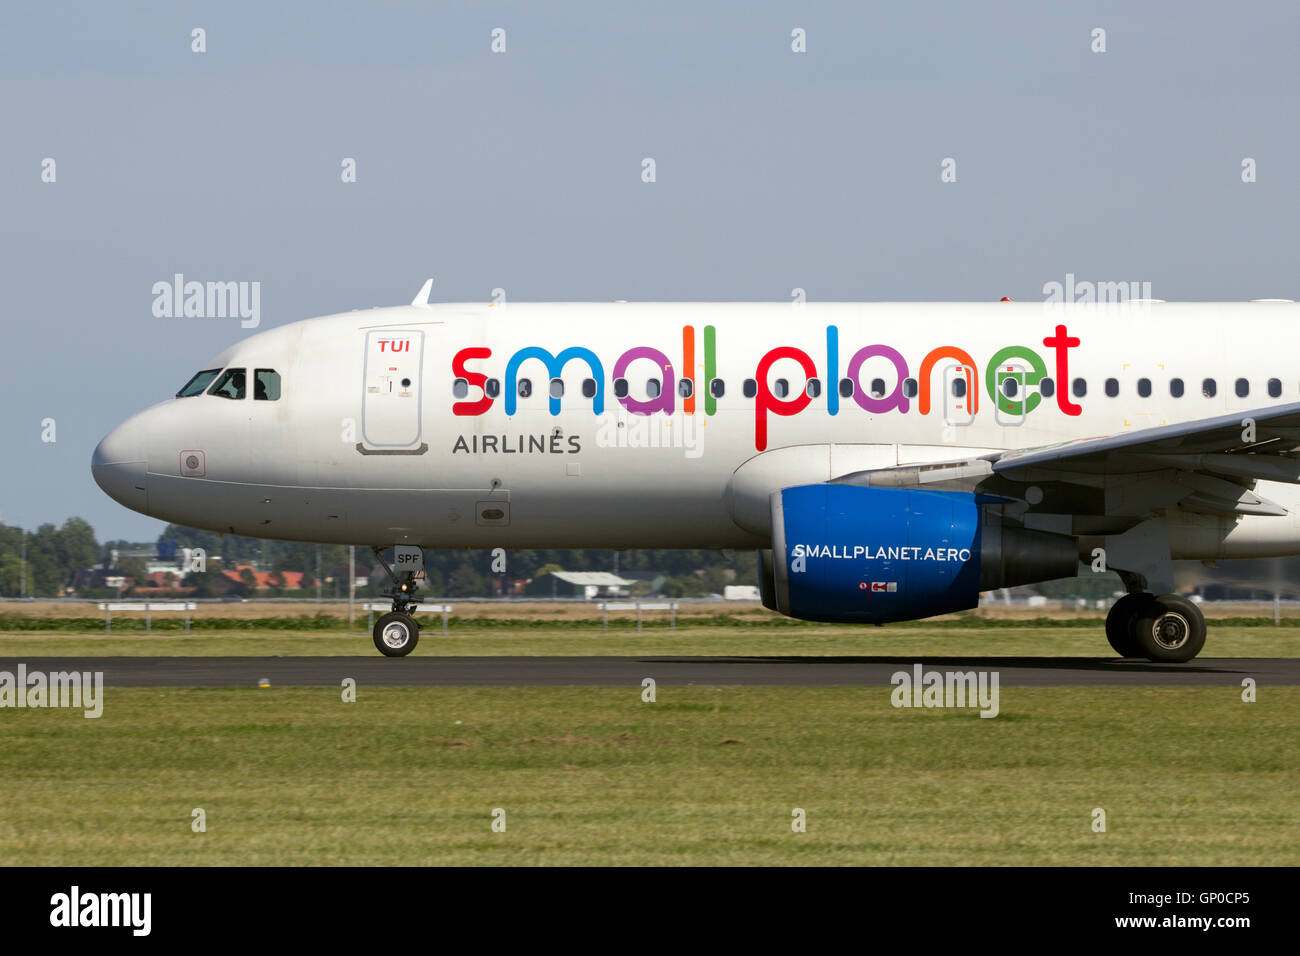 Small Planet Airlines Airbus A320 take-off from Amsterdam Schiphol airport Stock Photo